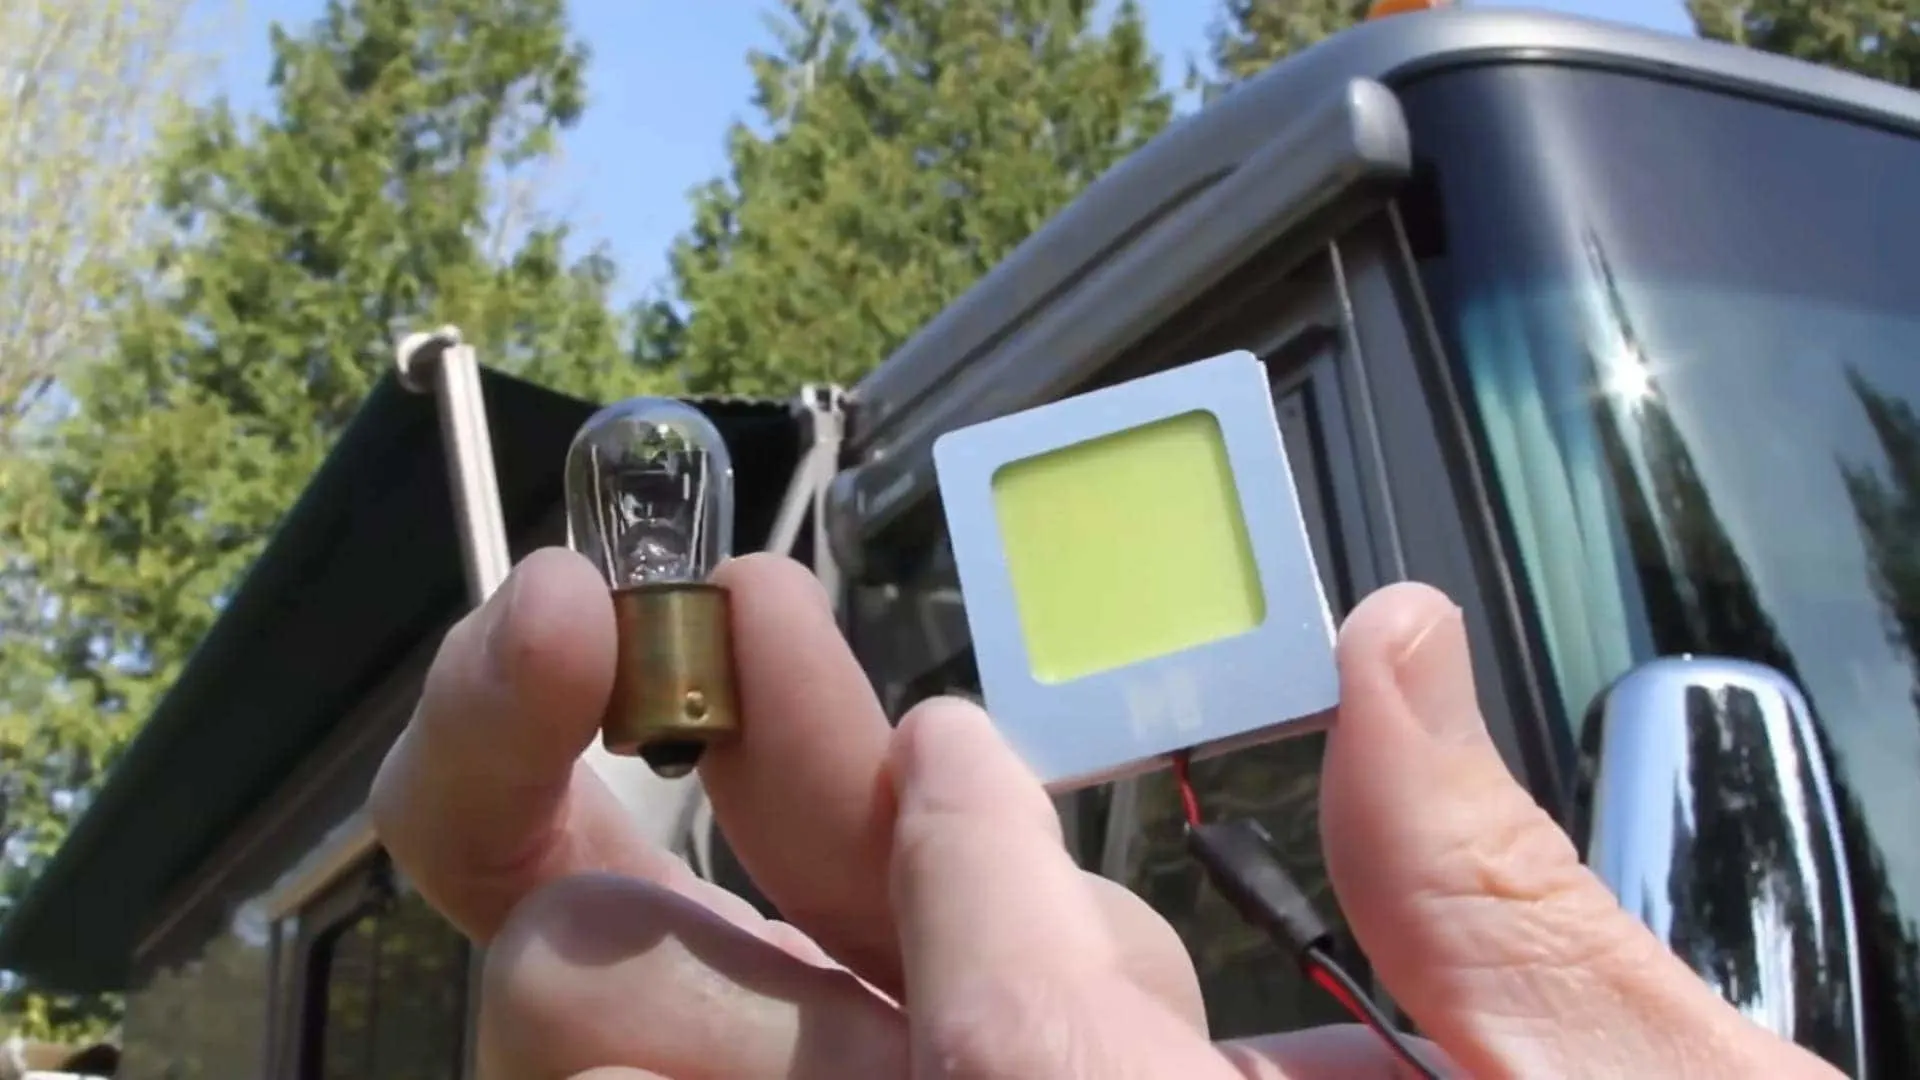 RV living tips are shown in this photo of a traditional RV light bulb and an LED RV light